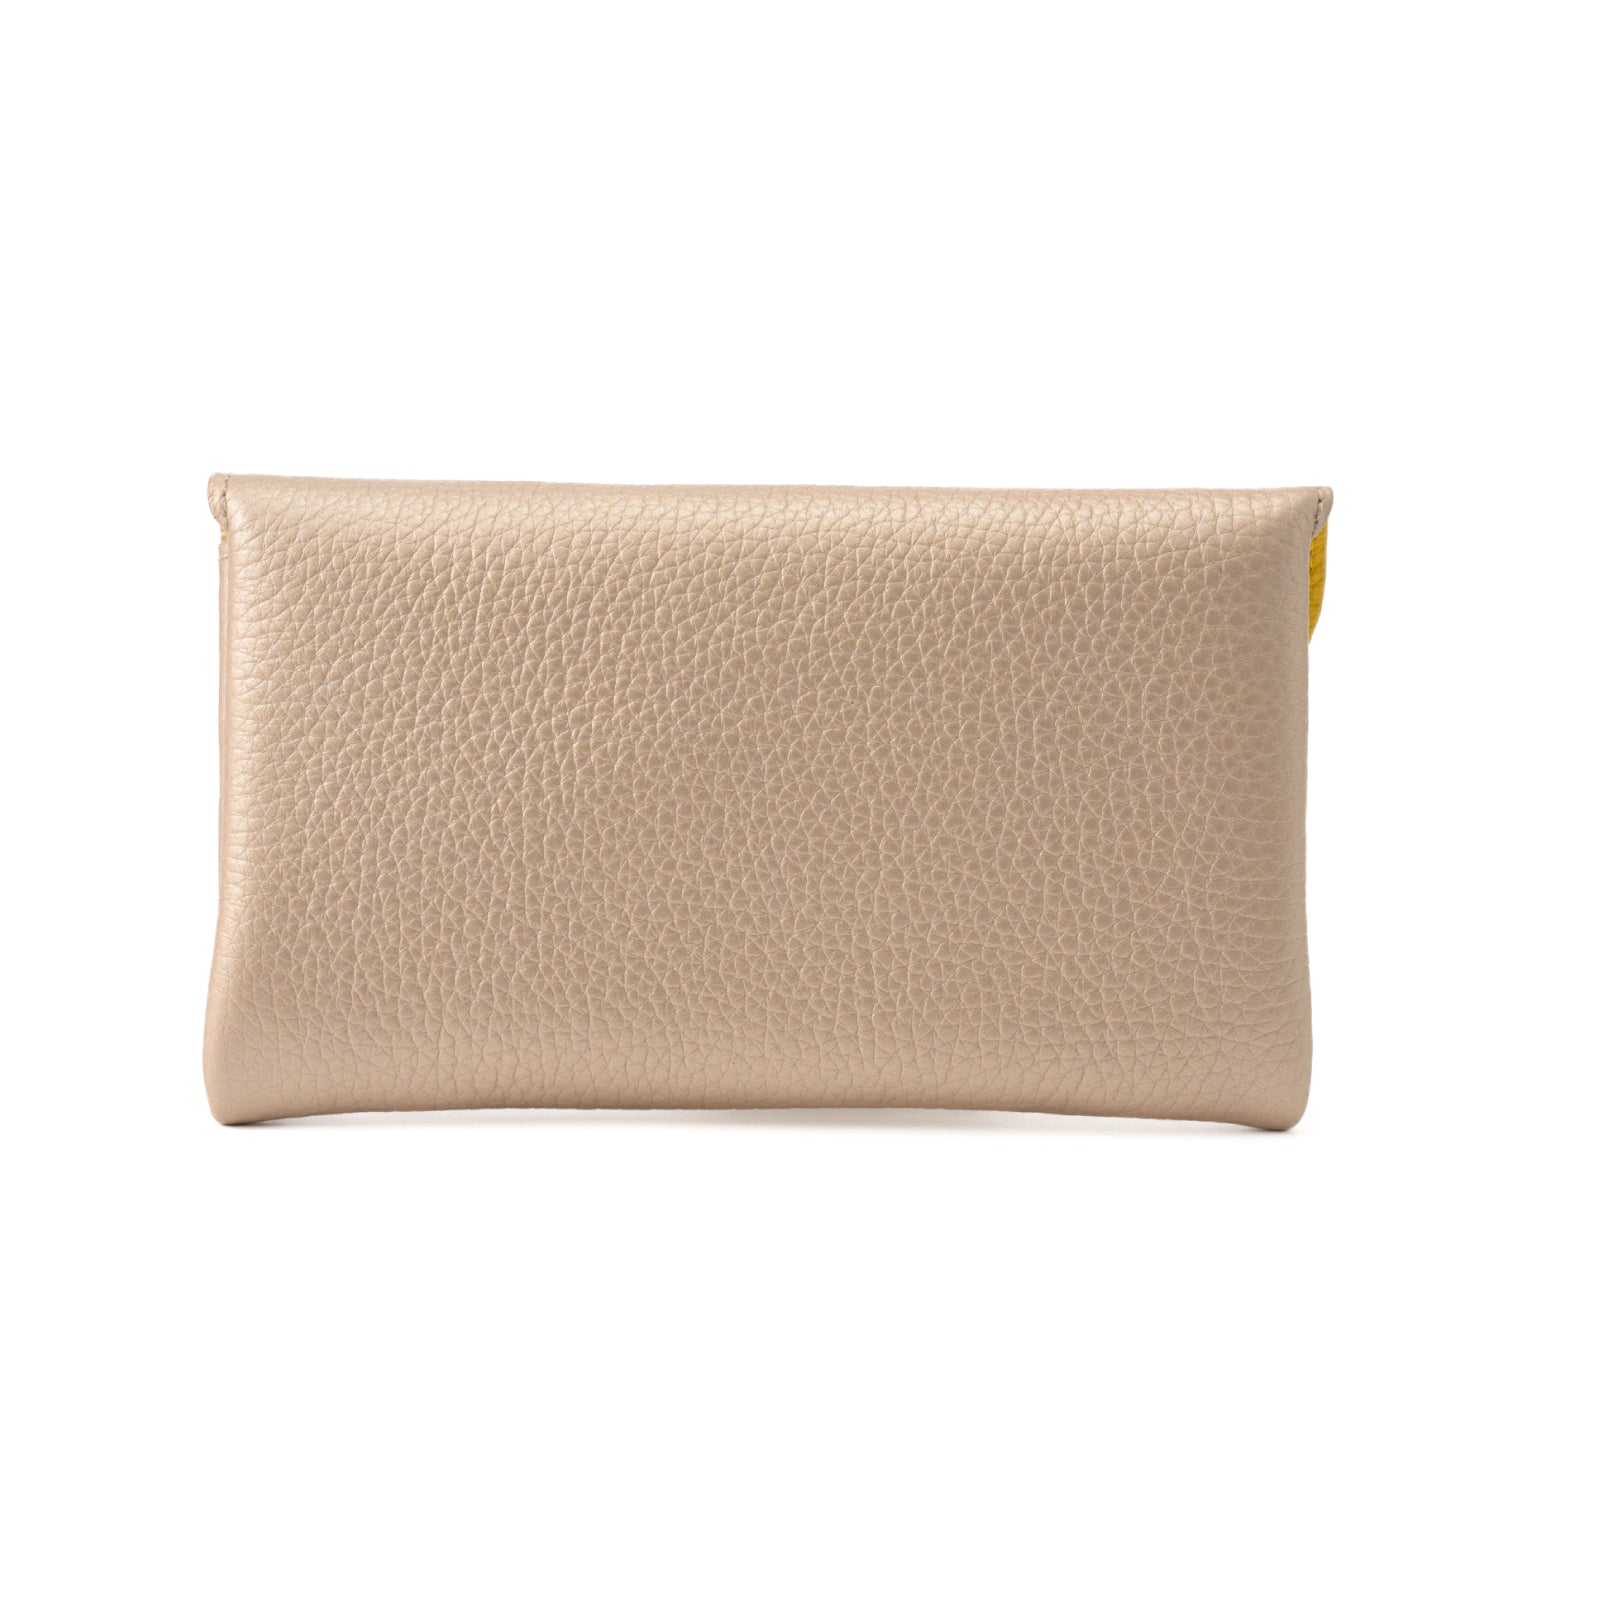 Leather flap long wallet / Taurillon Clemence